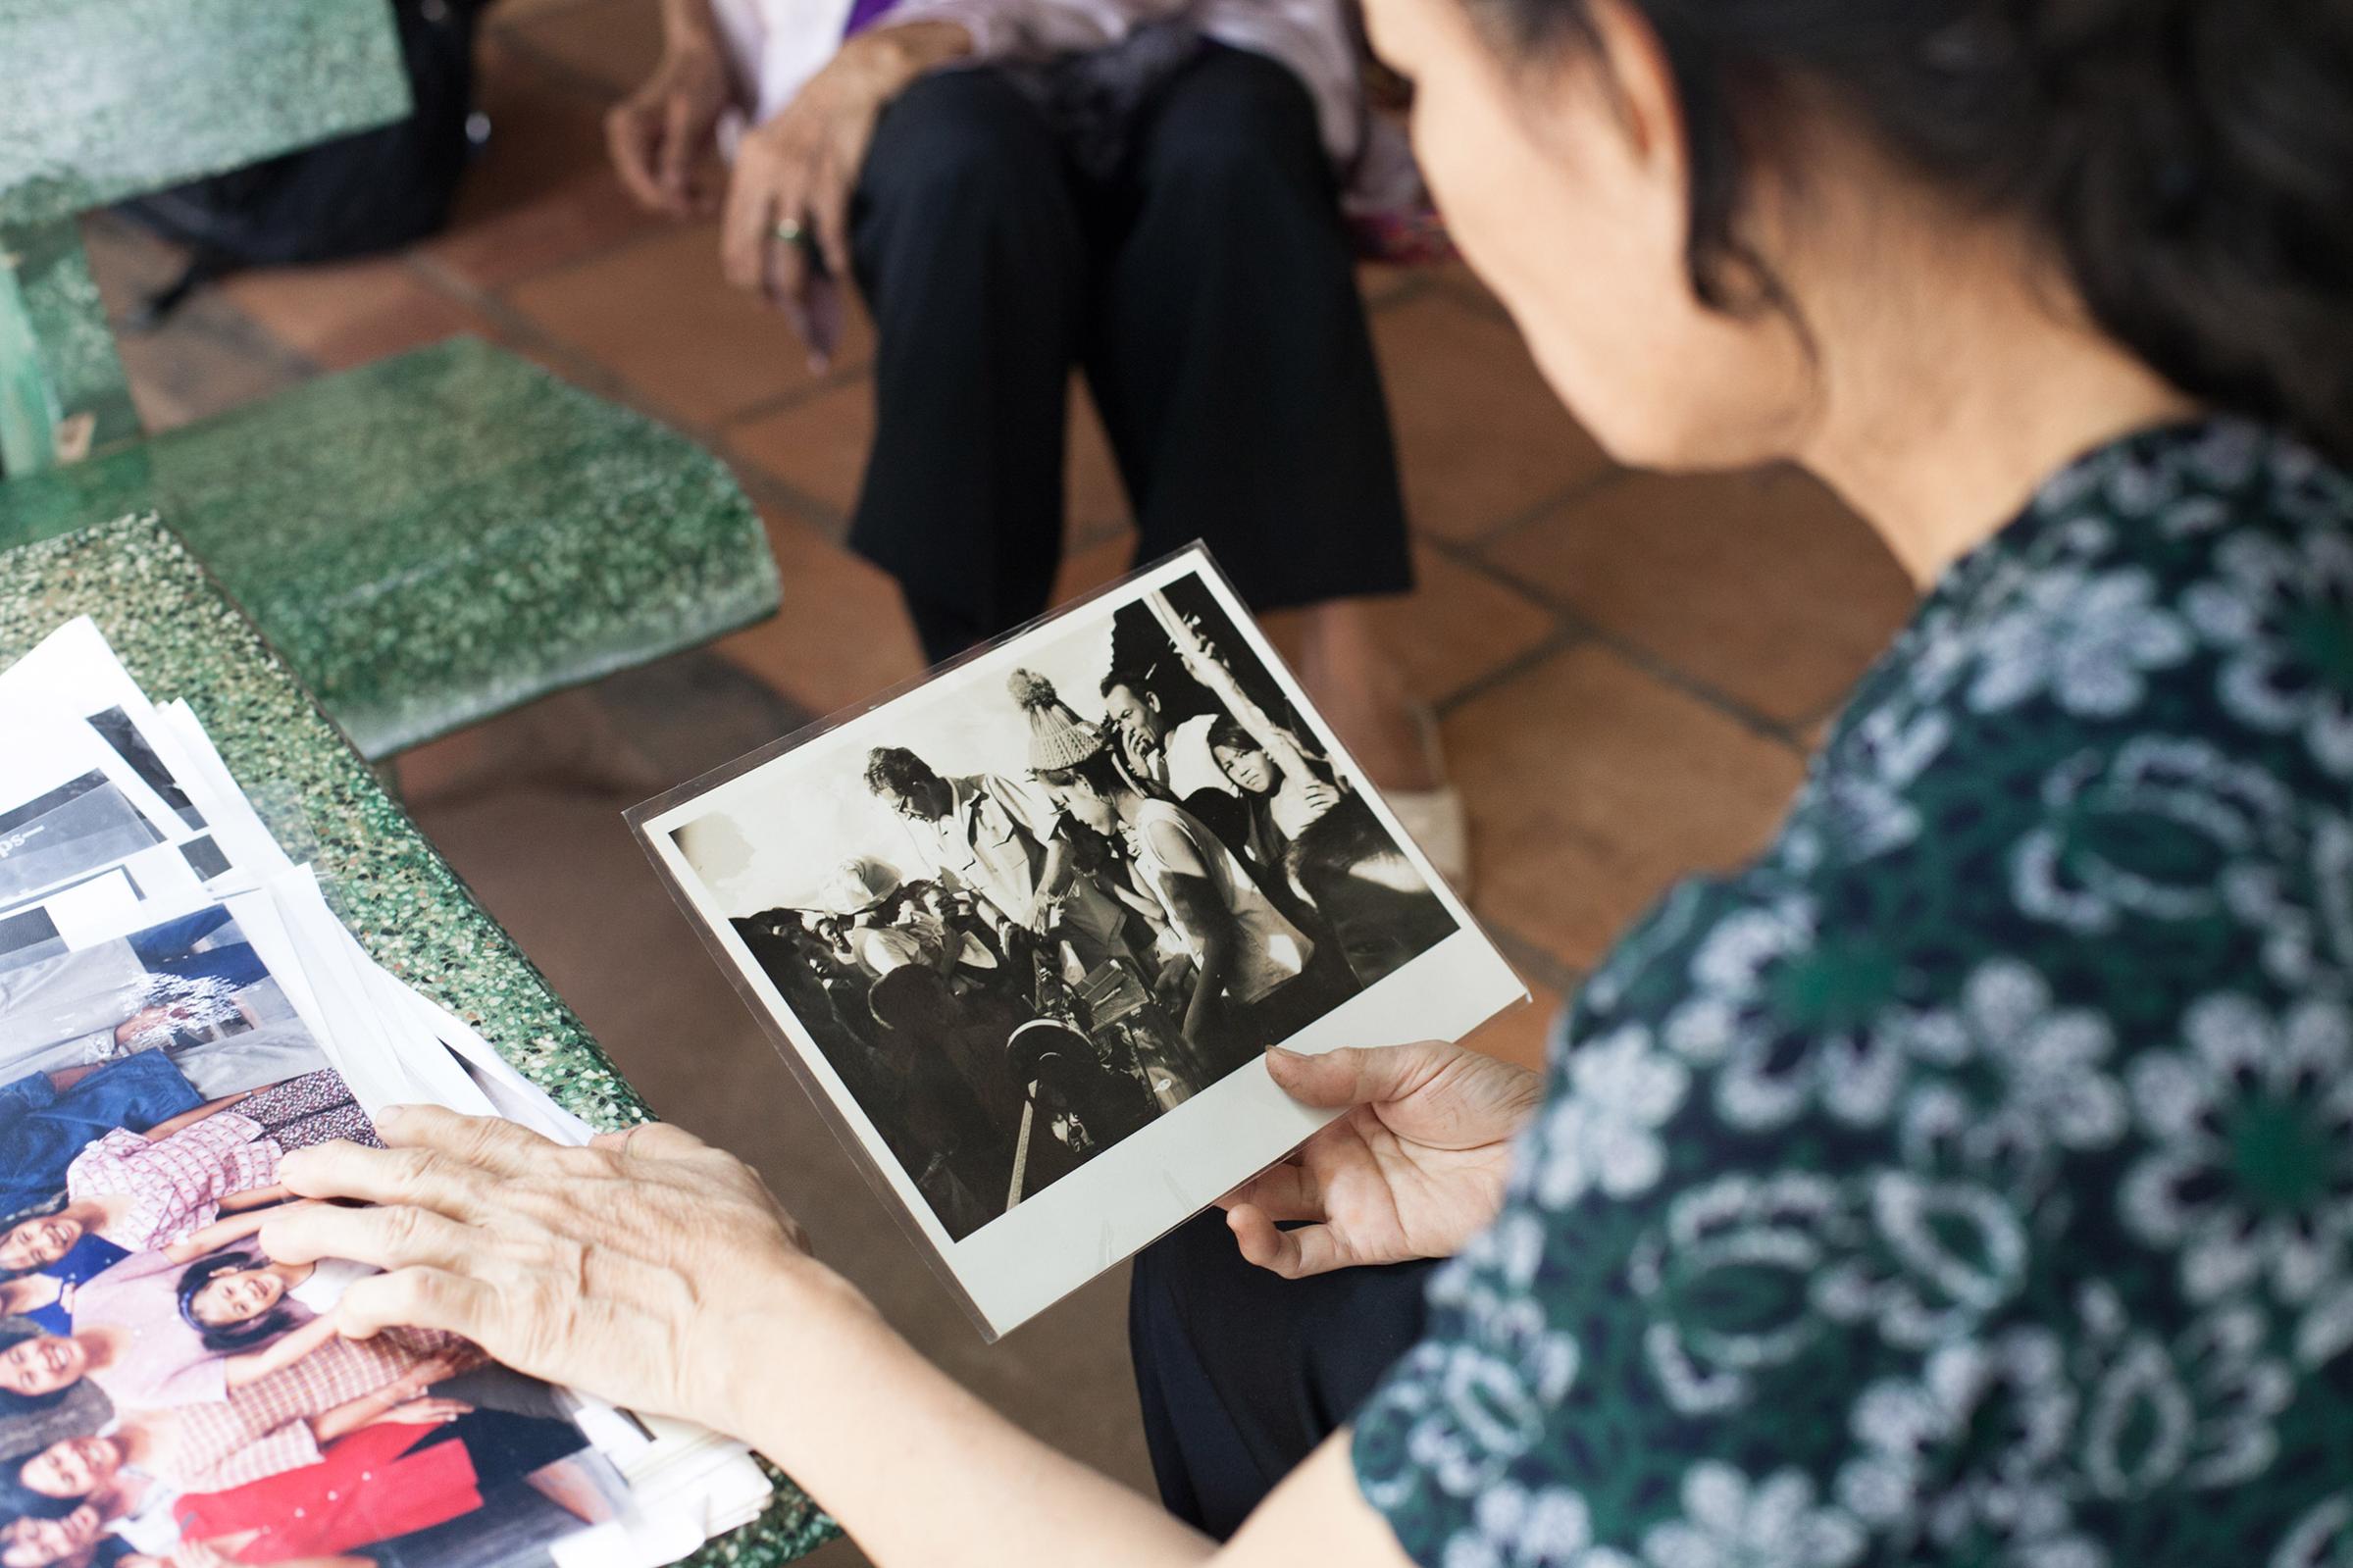 Nguyễn Thị Tròn (Nguyen Thi Tron) holds a laminated photograph from 1969 depicting her (in woollen hat), Vietnam War photographer Larry Burrows (wearing glasses), her father (at right) and her village neighbours when Burrowed delivered to her the gift of a sewing machine. This new picture was taken outside Nguyễn's small convenience store in Suoi Da commune in Duong Minh Chau district, Tây Ninh province, Vietnam.